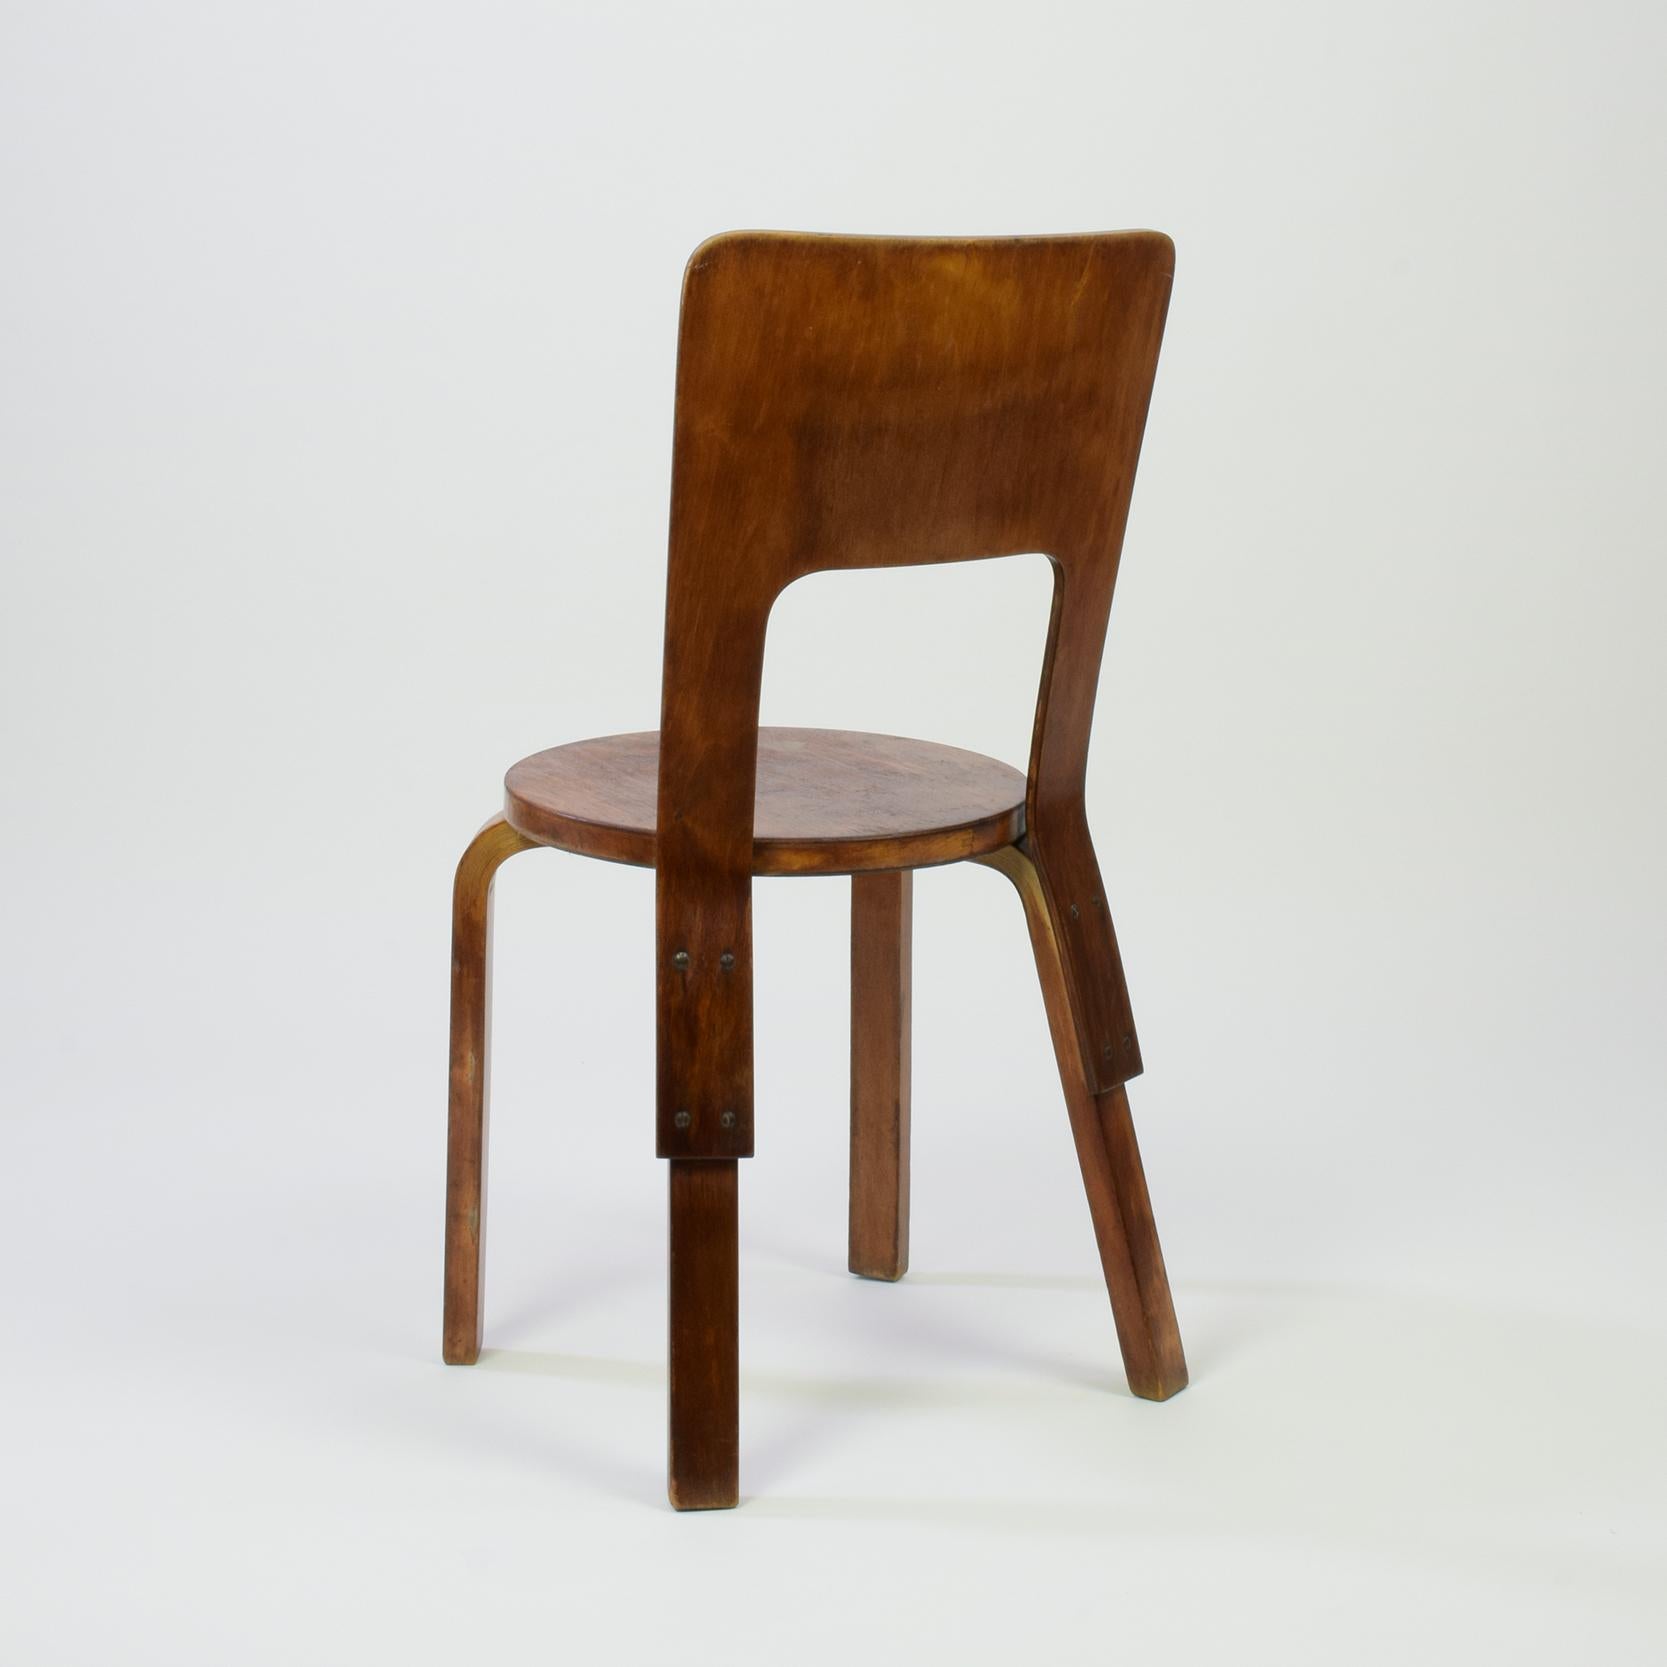 Alvar Aalto, Set of 3 Model 66 Chairs, 1933, Original Early Production 6